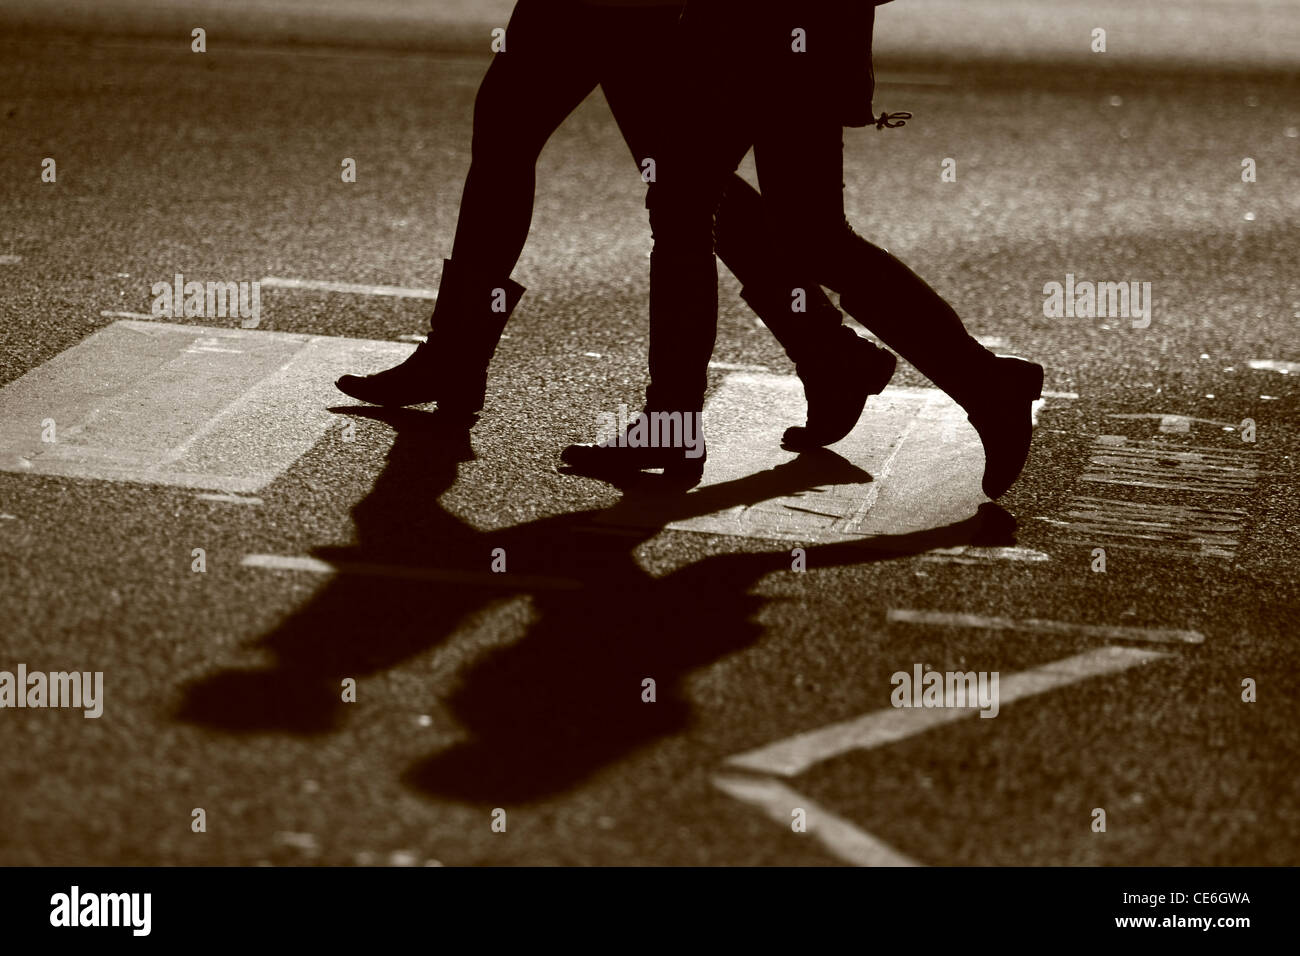 The legs of two females as they cross a road at a zebra crossing Stock Photo